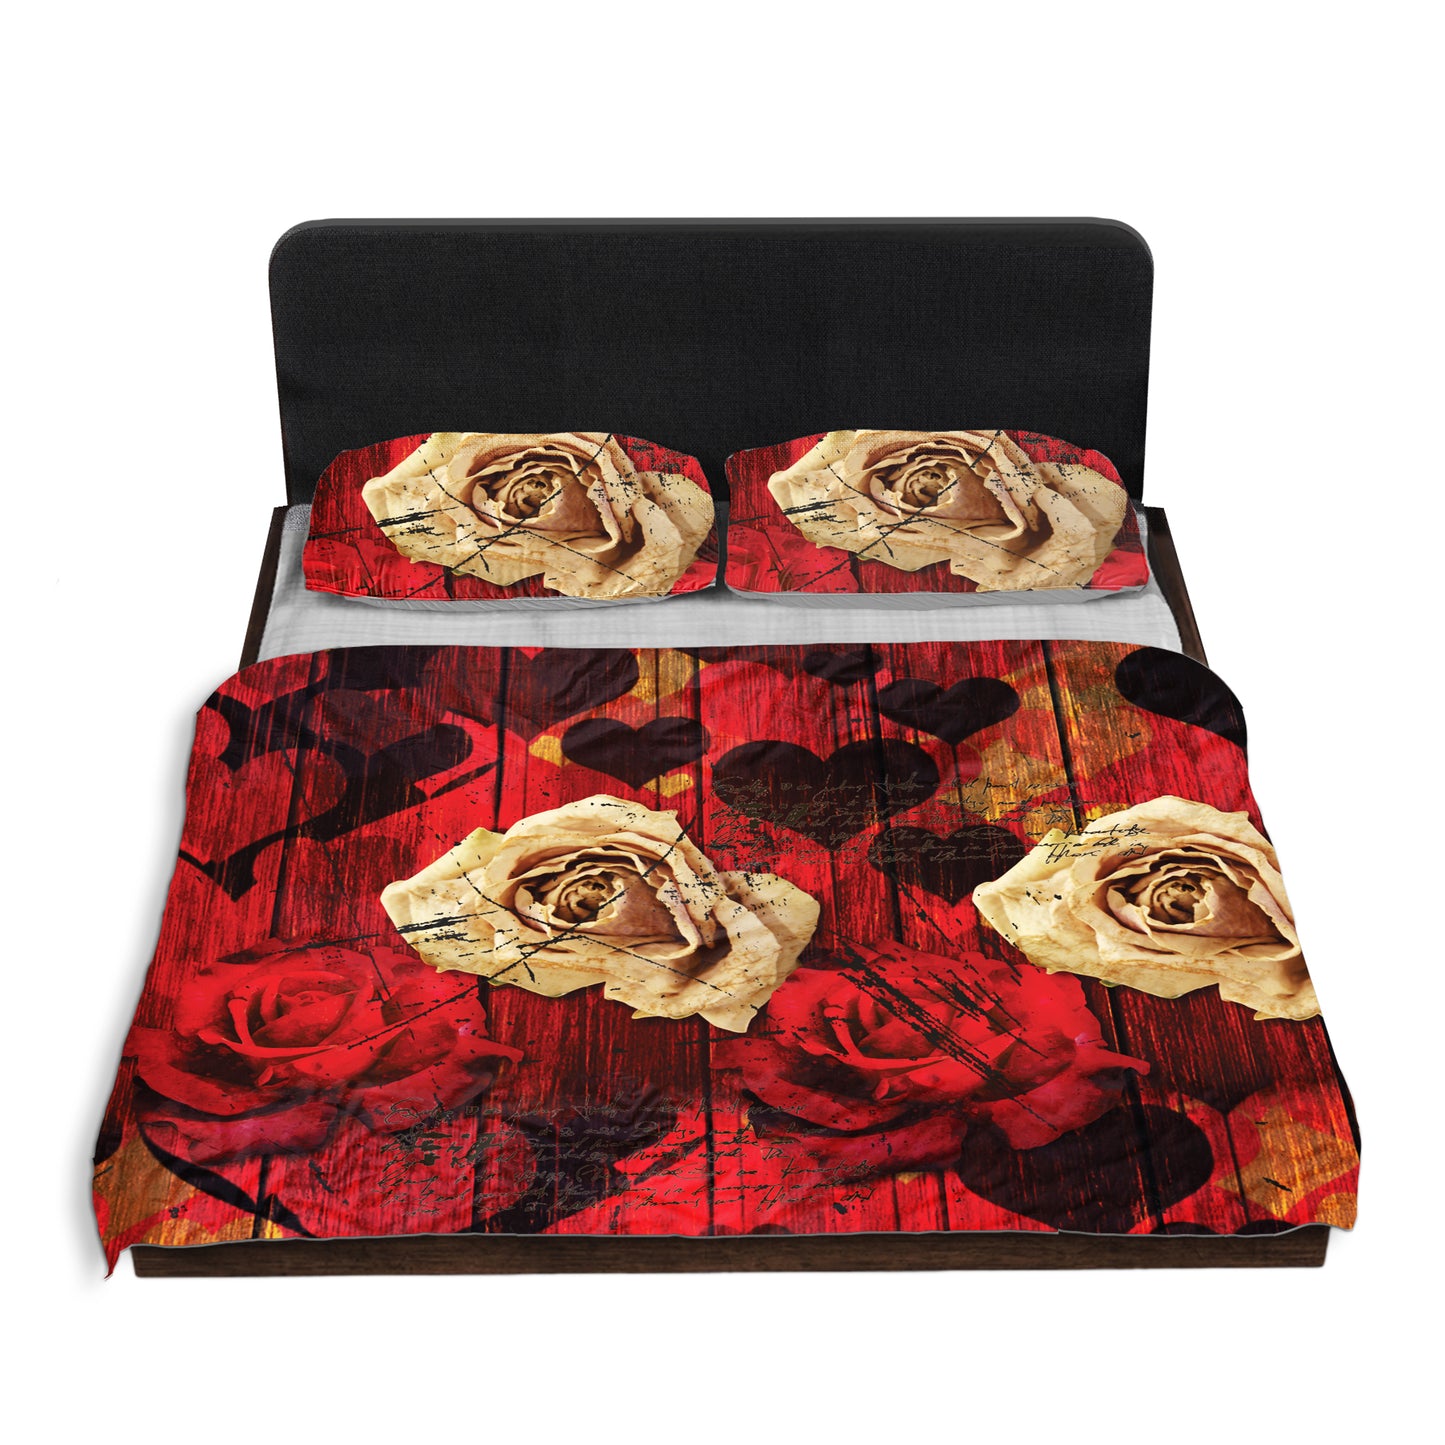 Vintage Roses and Hearts Duvet Cover Set